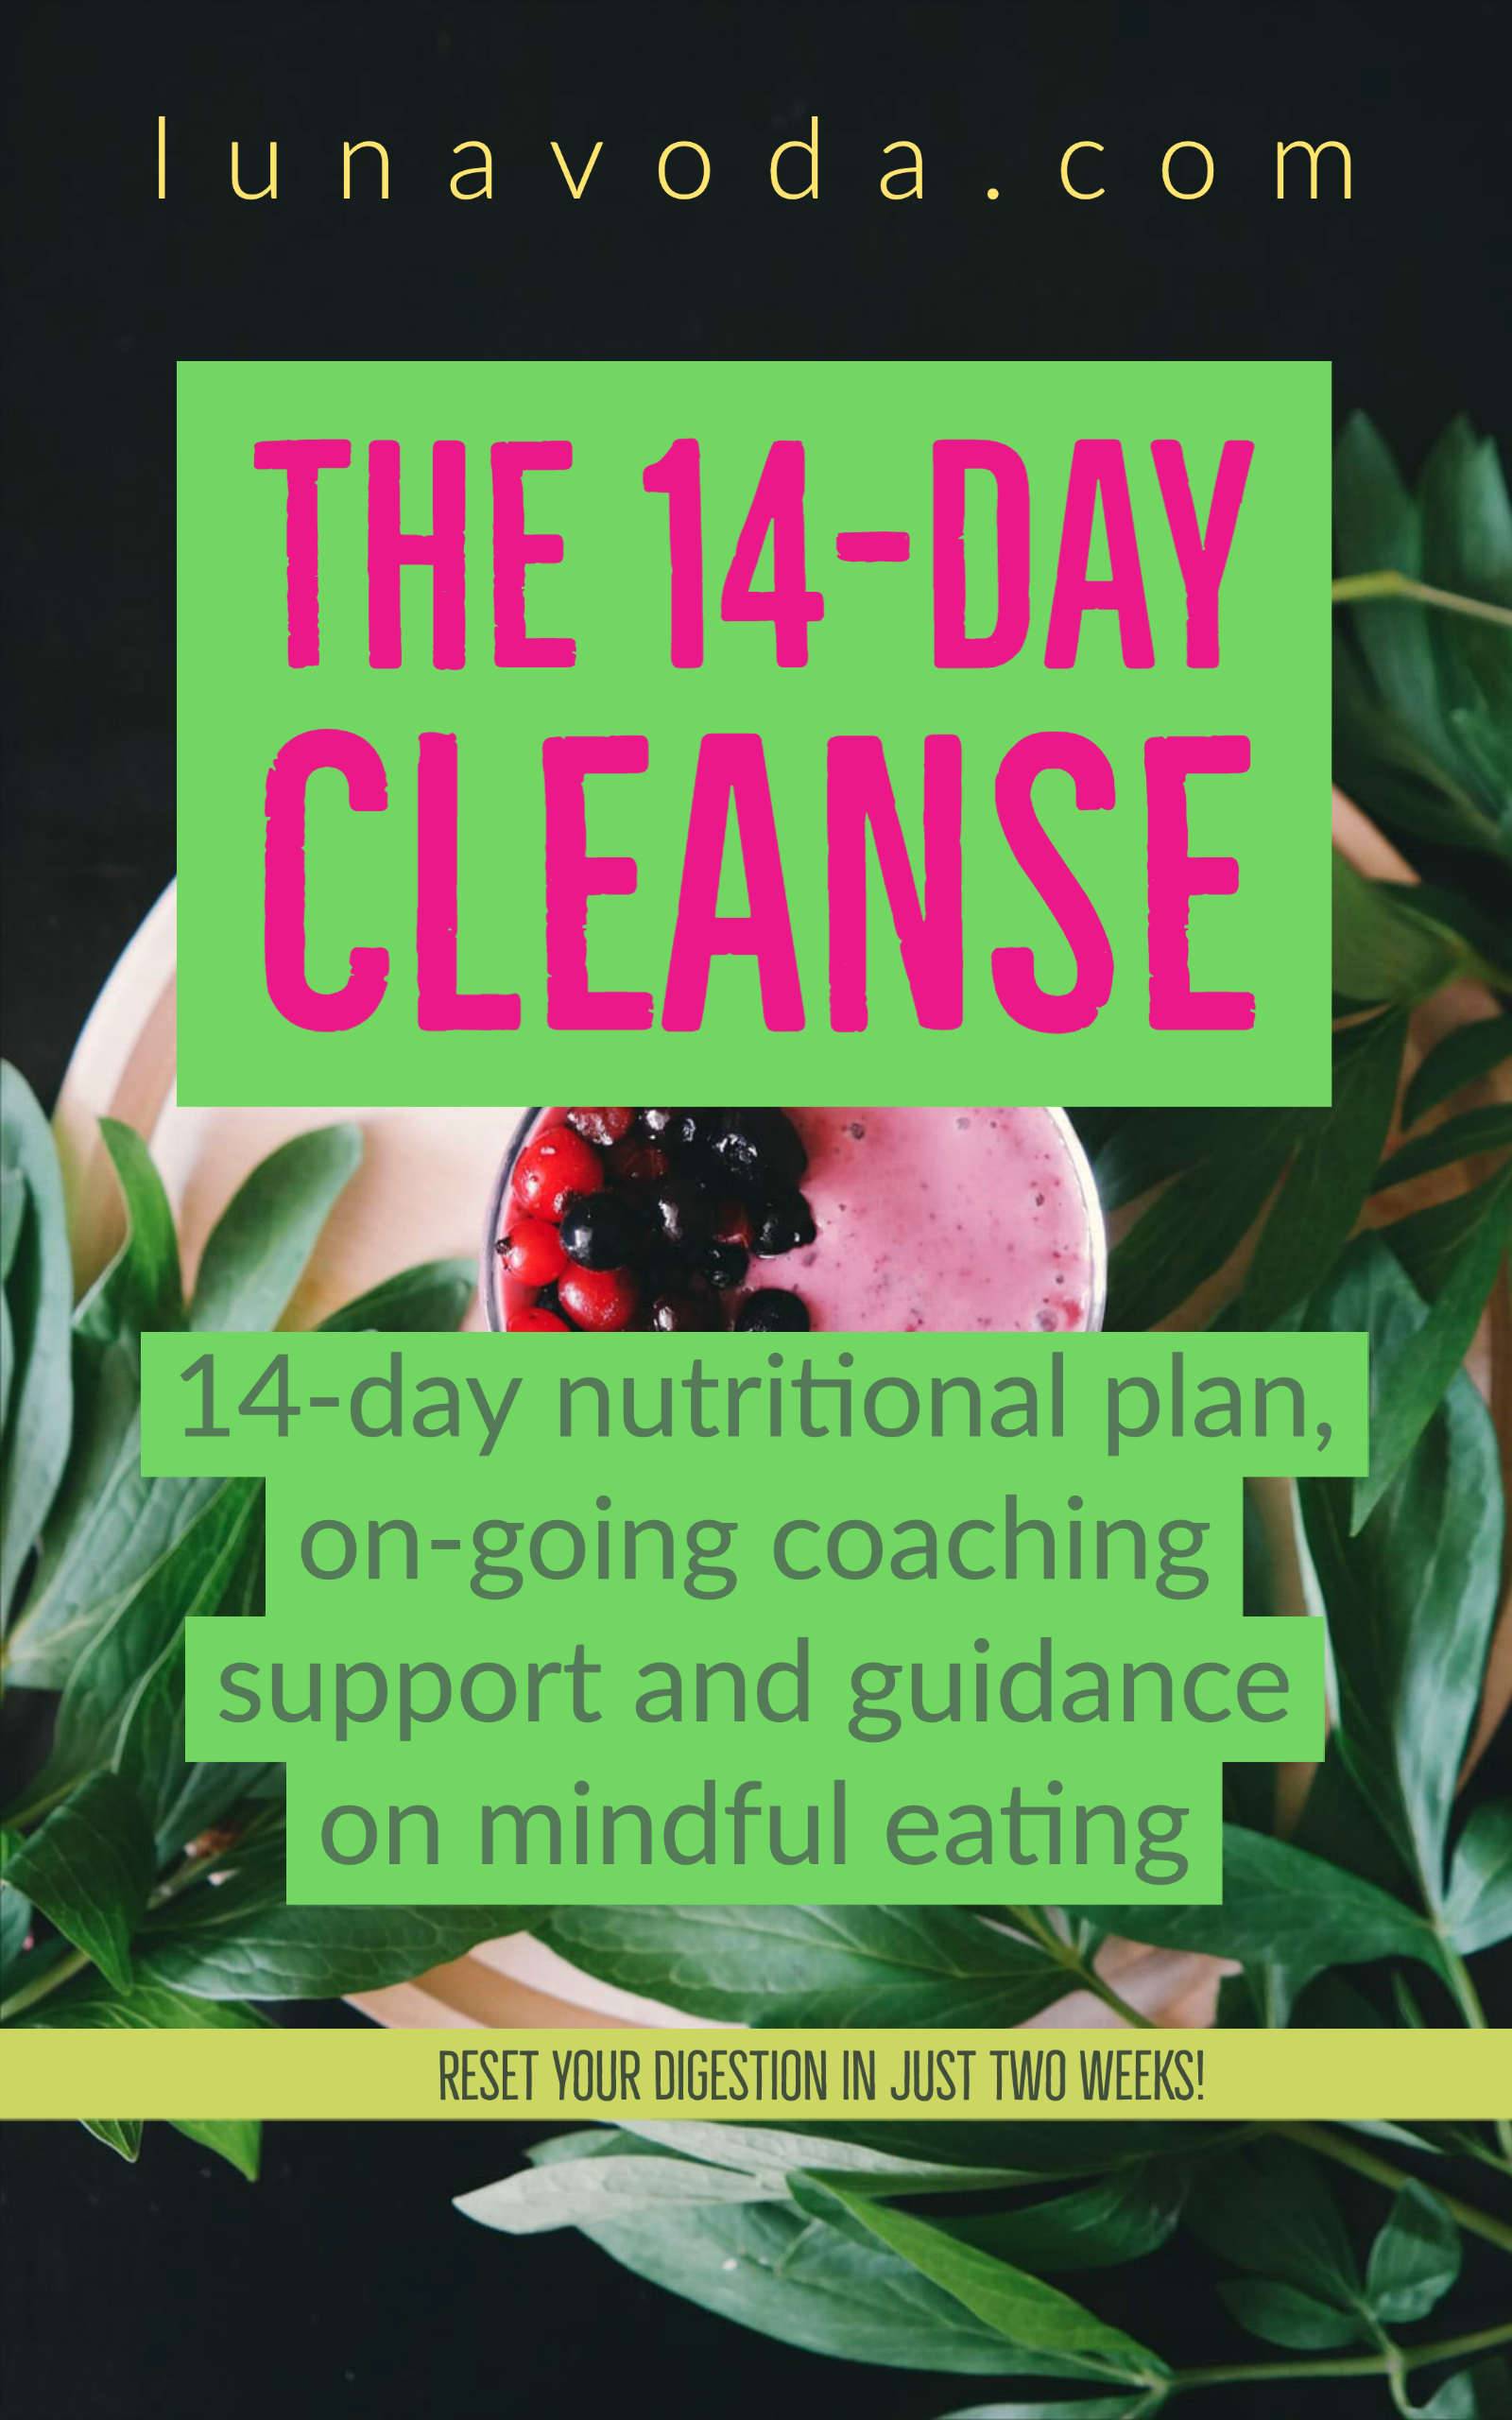 14daycleanse